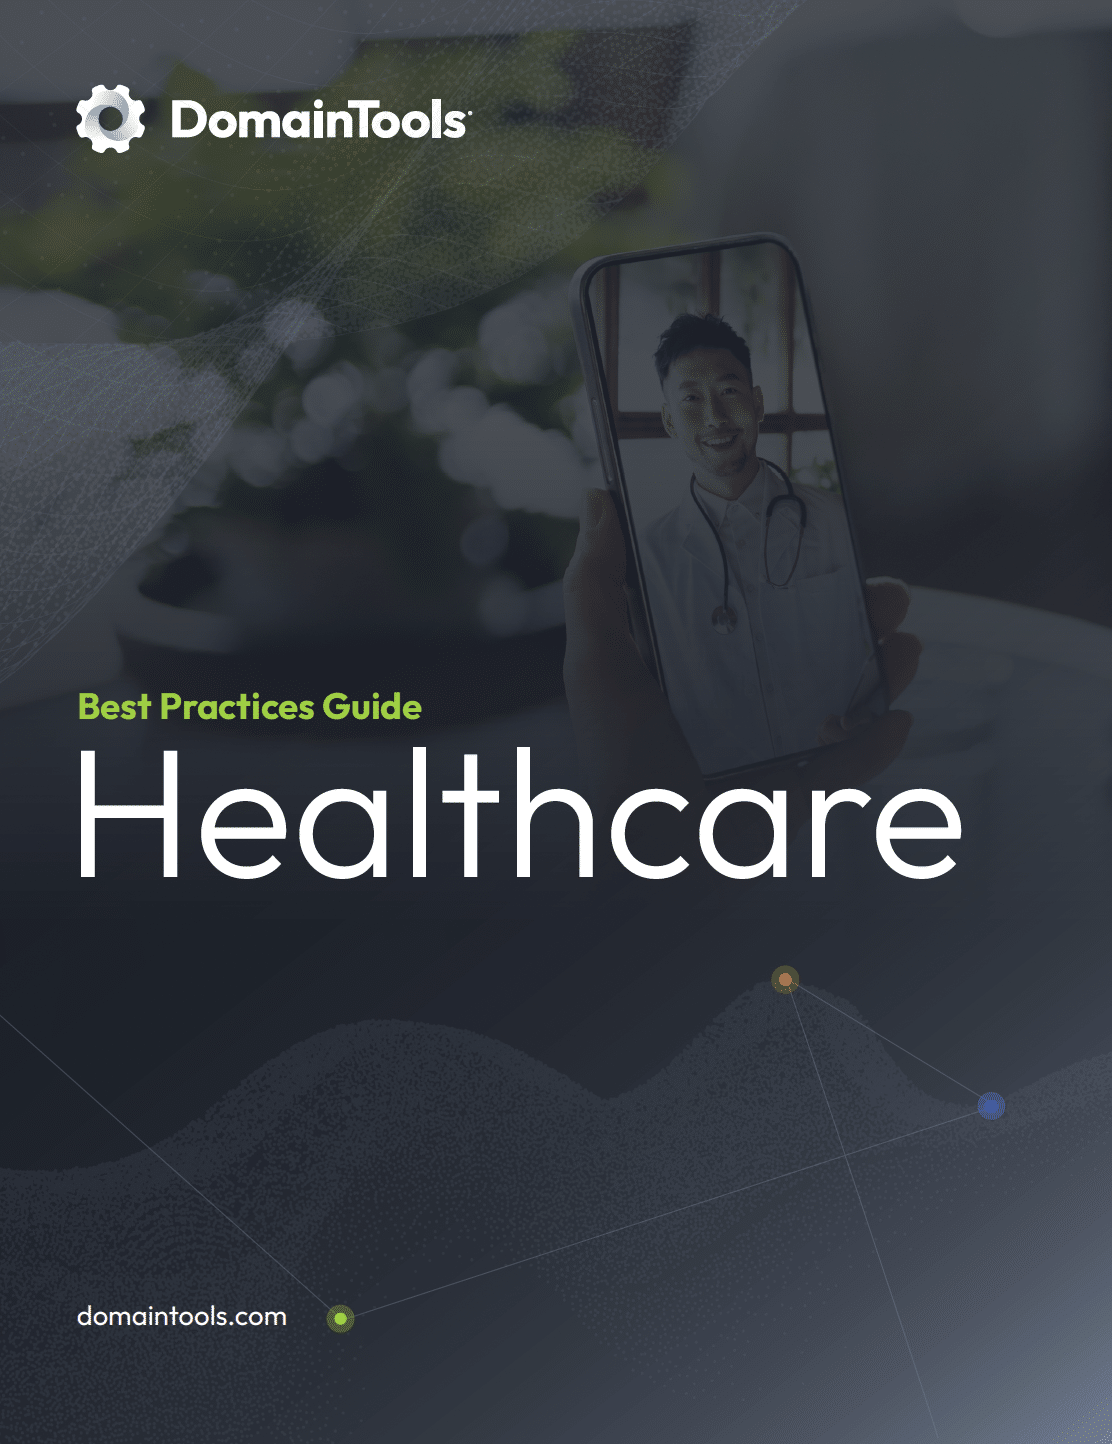 Promotional poster for DomainTools featuring a smartphone with a smiling male doctor on its screen, titled "Best Practice Guide for Healthcare." The background includes a world map and digital elements.